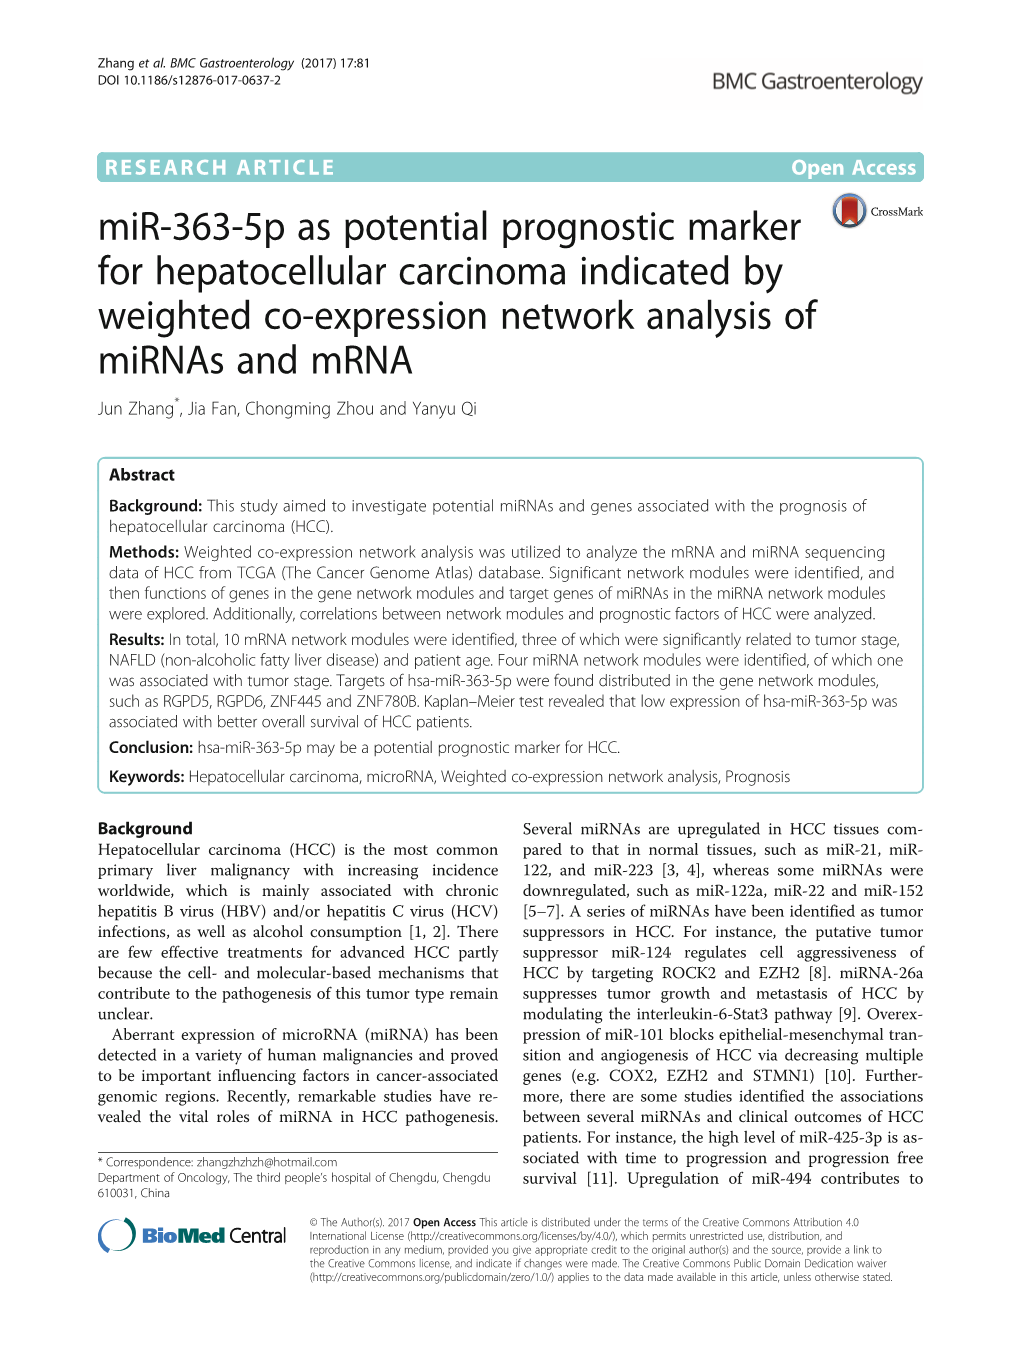 Mir-363-5P As Potential Prognostic Marker for Hepatocellular Carcinoma Indicated by Weighted Co-Expression Network Analysis of M